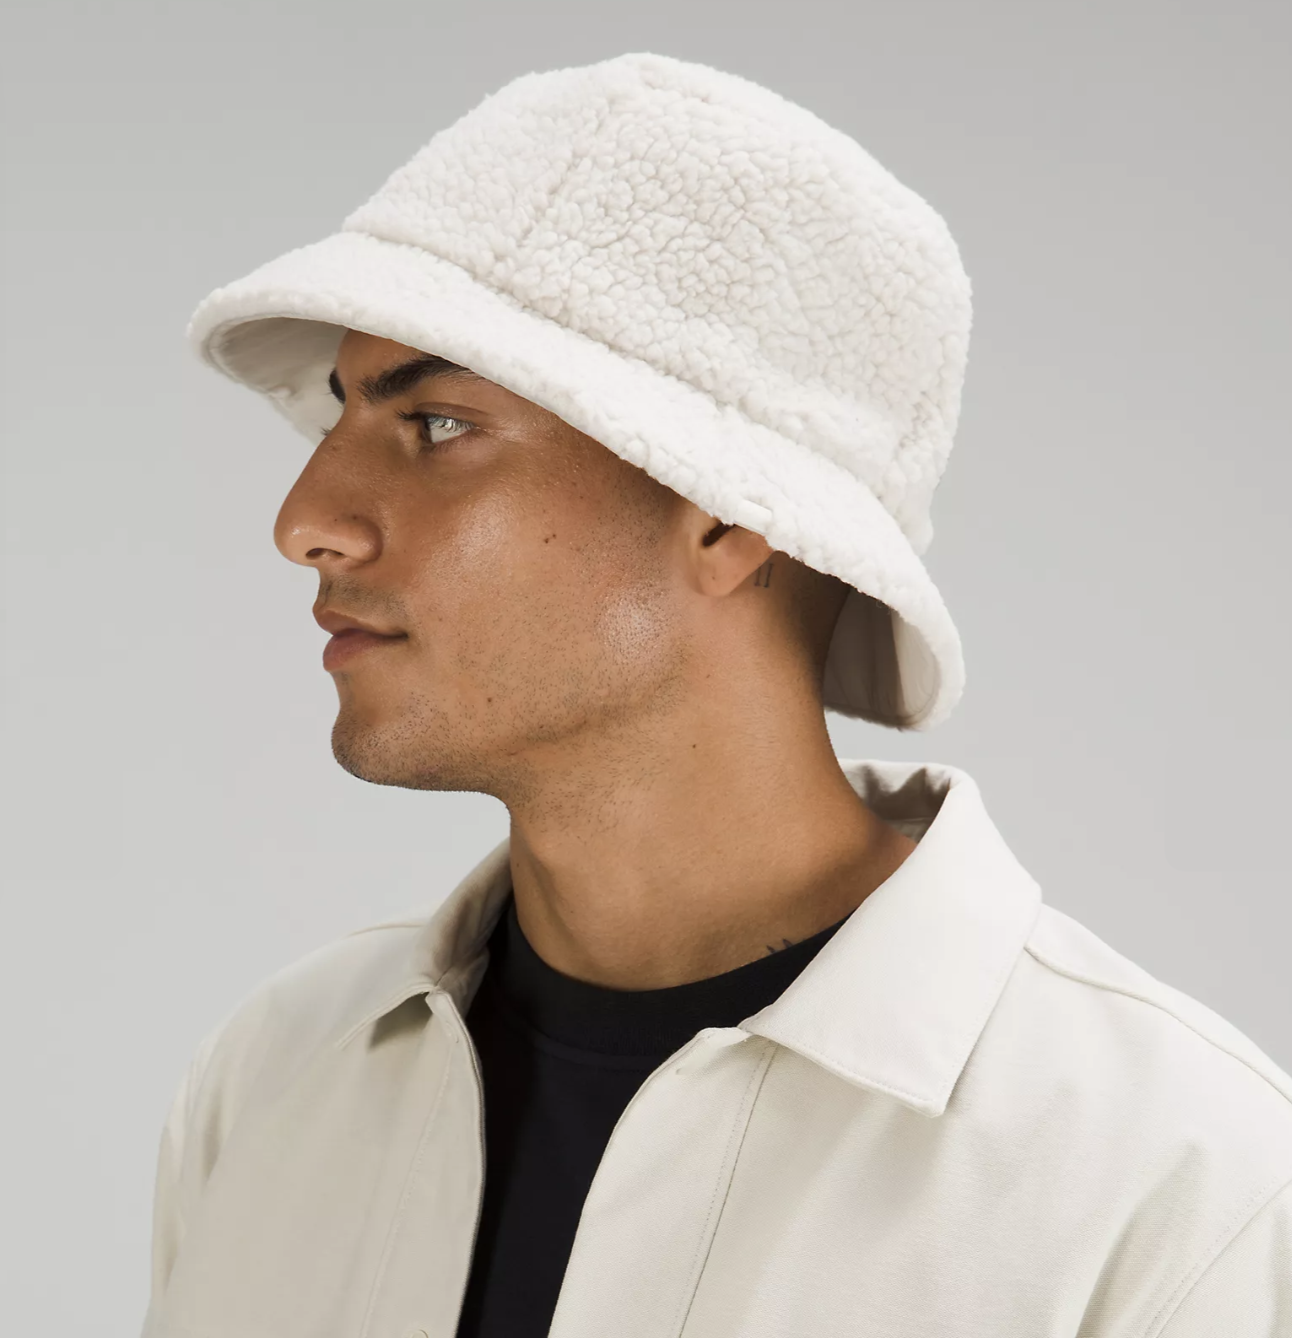 a person wearing a bucket hat in front of a plain background